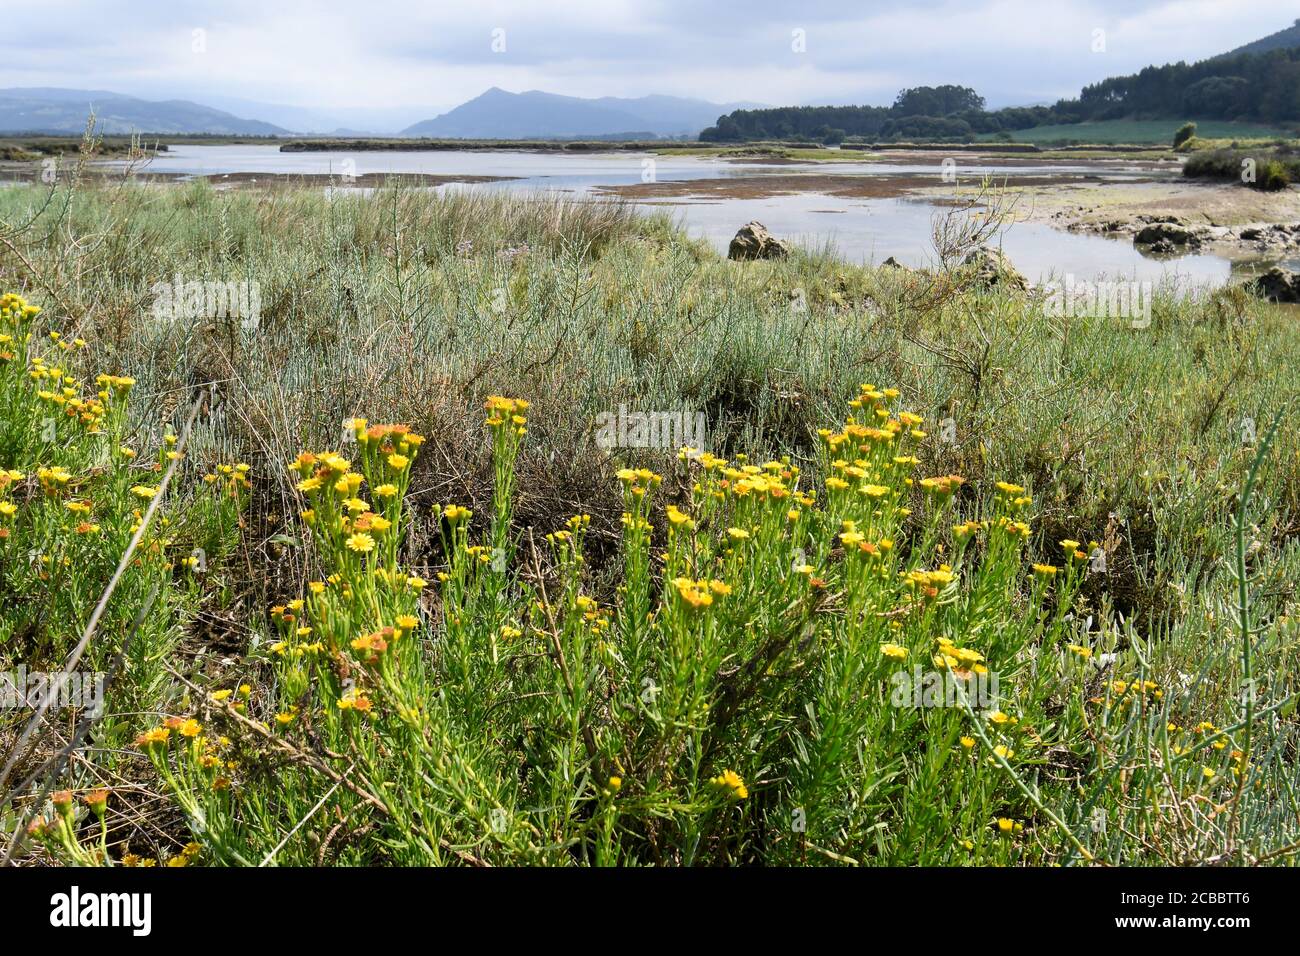 Marisma de Santoña in the background, with Inula crithmoides in the foreground Stock Photo